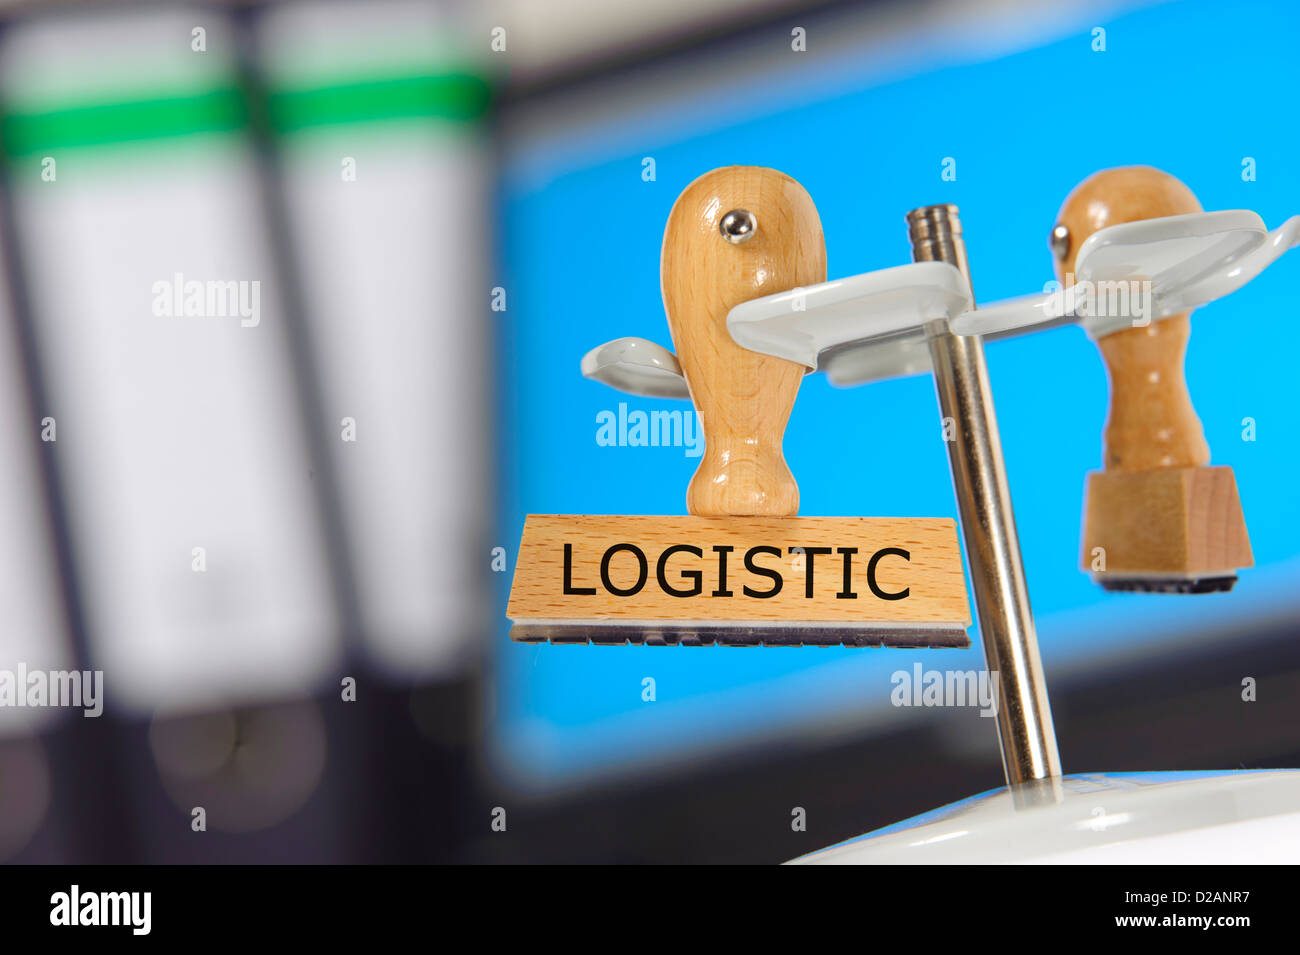 logistic printed on rubber stamp Stock Photo